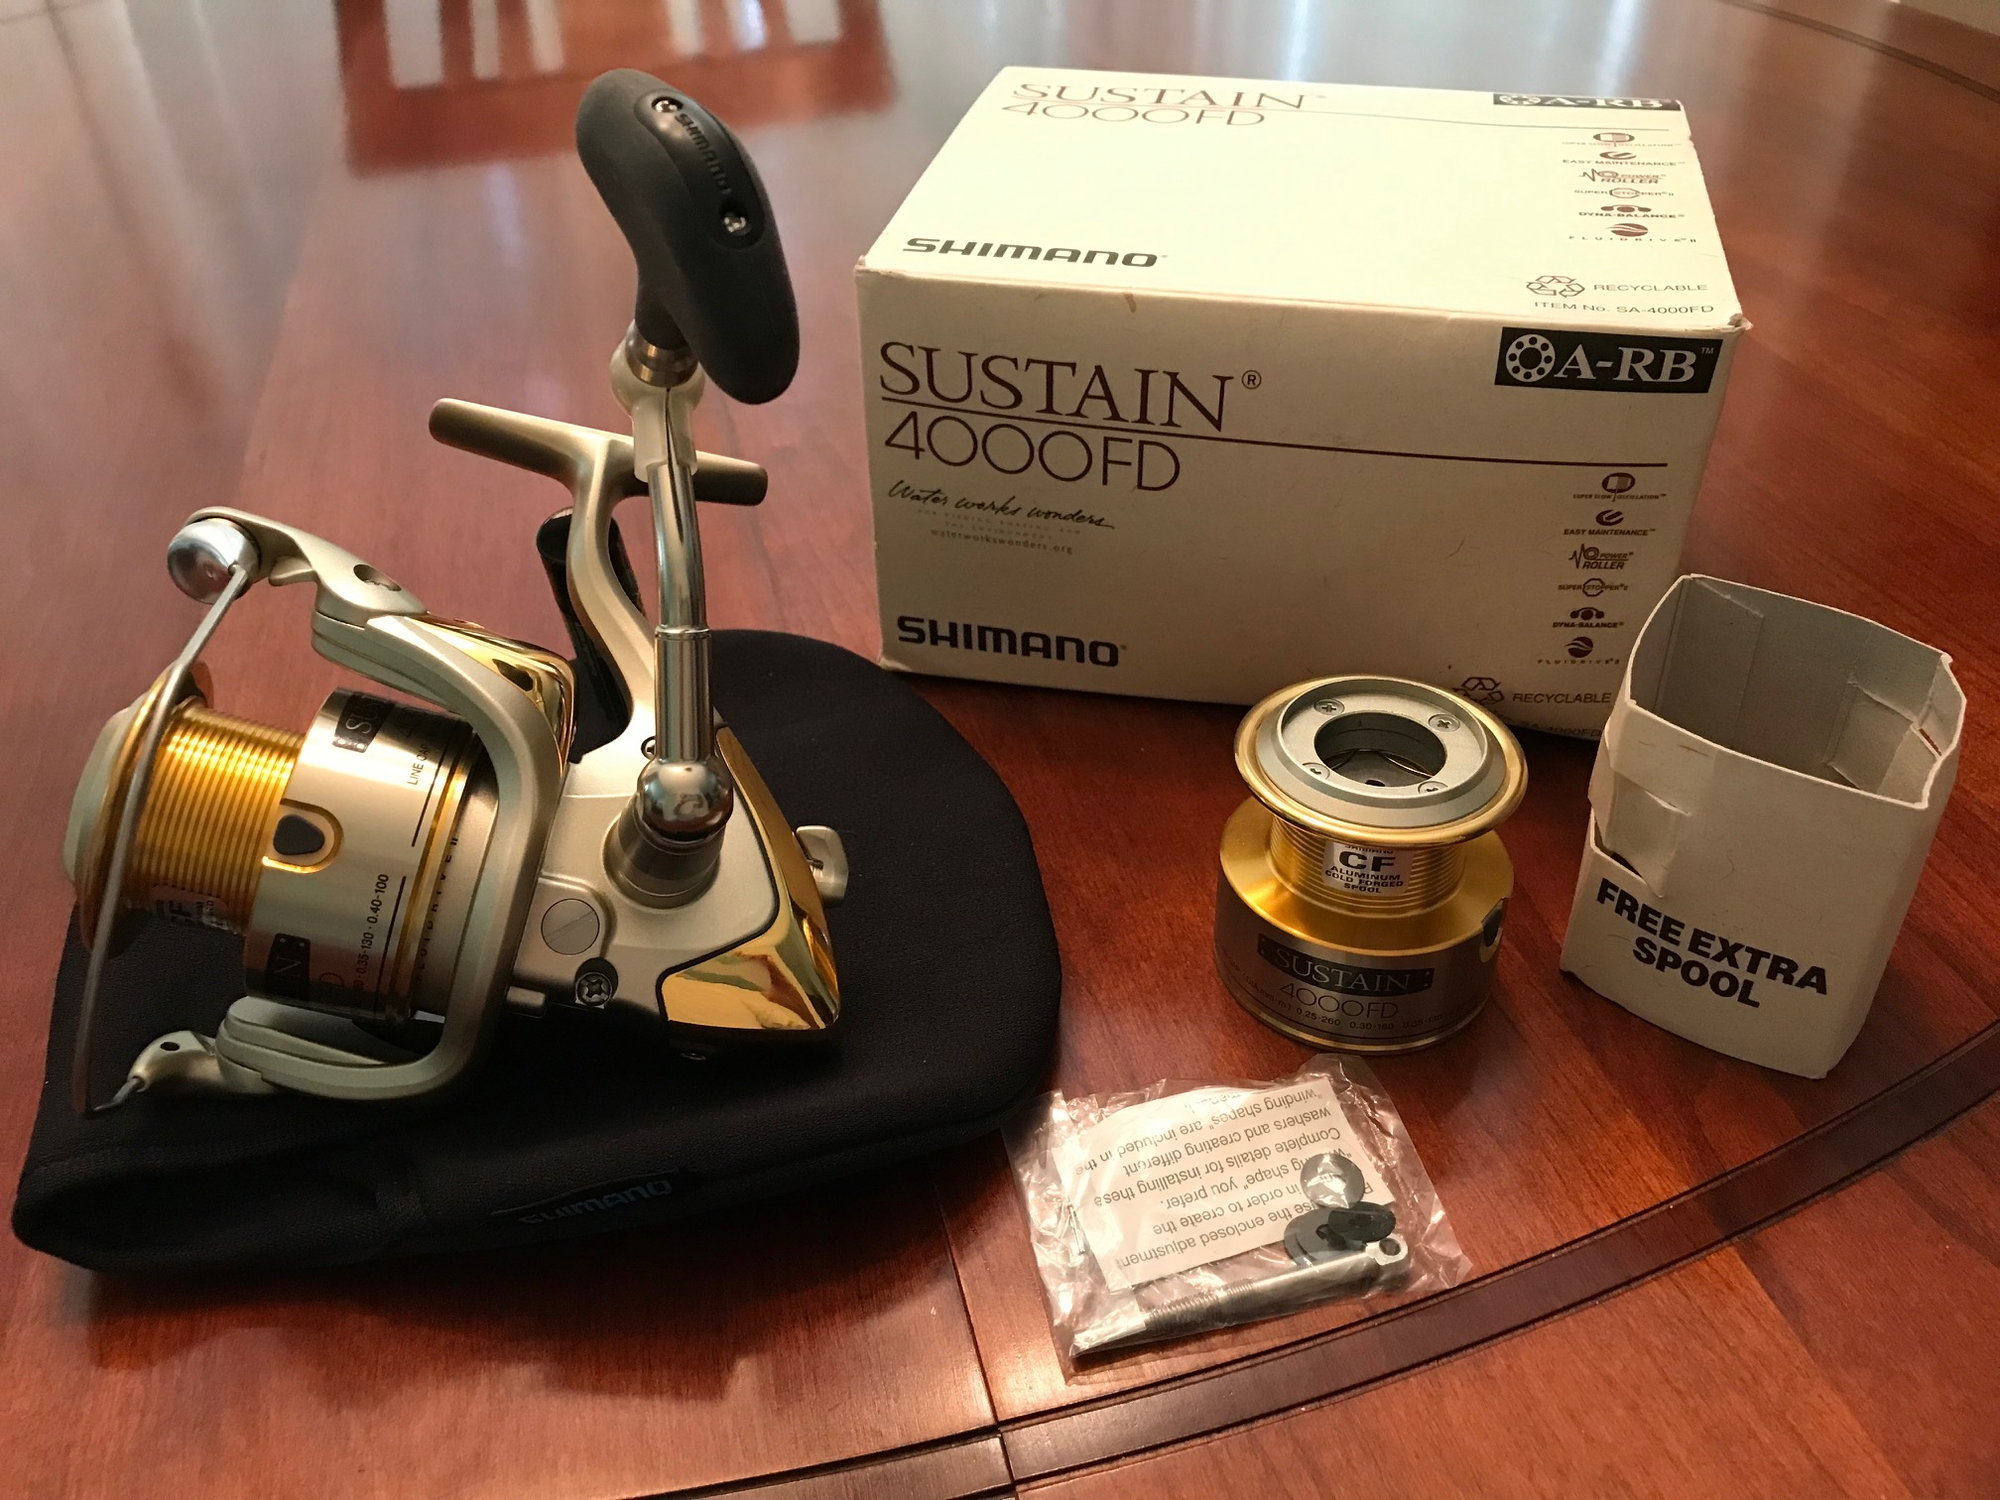 Fishing reel similar to Shimano Stella for around $200? - Page 2 - The Hull  Truth - Boating and Fishing Forum